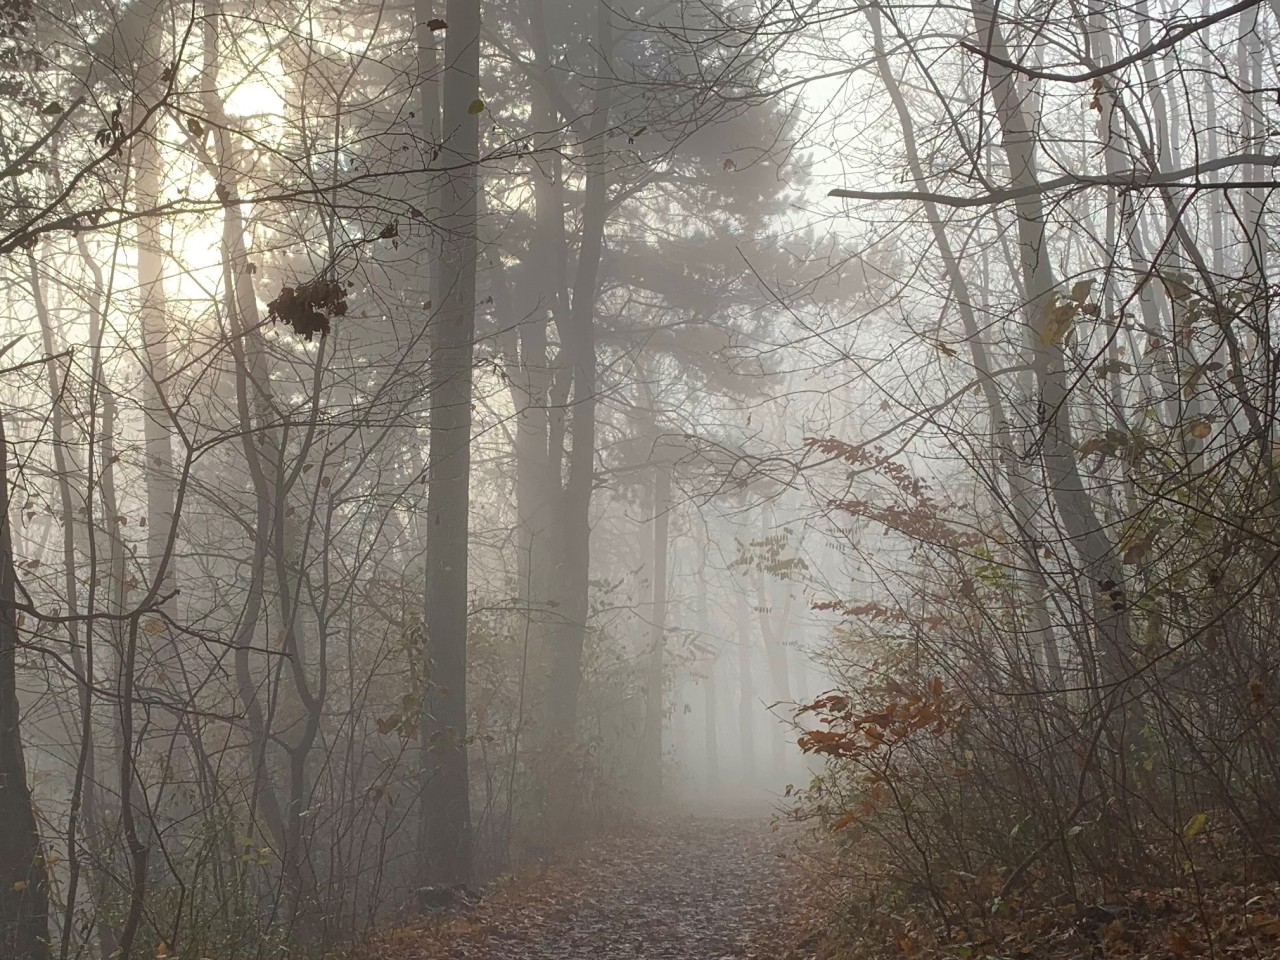 #mine#november#fog#foggy#foggy forest#foggy morning#mist#misty woods#woods#forest#forestcore#path#sun#light#sunrise#fogcore#ethereal#ethereal aesthetic#dirtcore#scenerey#nature#naturecore#goblincore#gremlincore#forest witch#dreamcore#lost#spooky#surreal